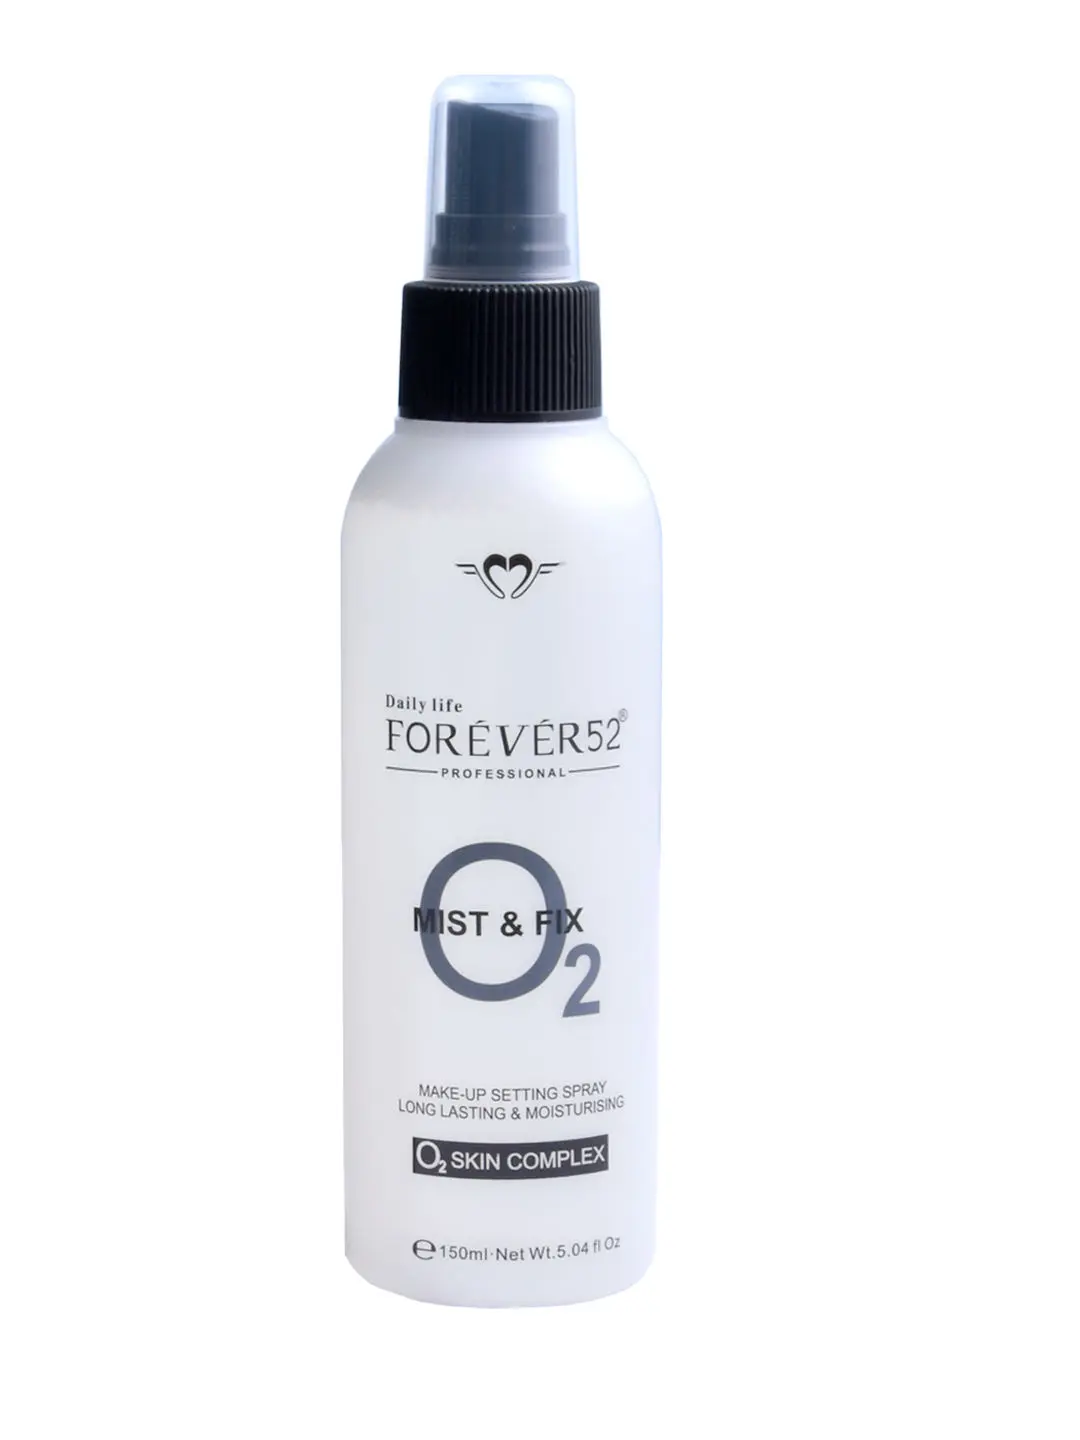 Daily Life Forever52 Mist & Fix Makeup Setting Spray MSM001 (150ml)